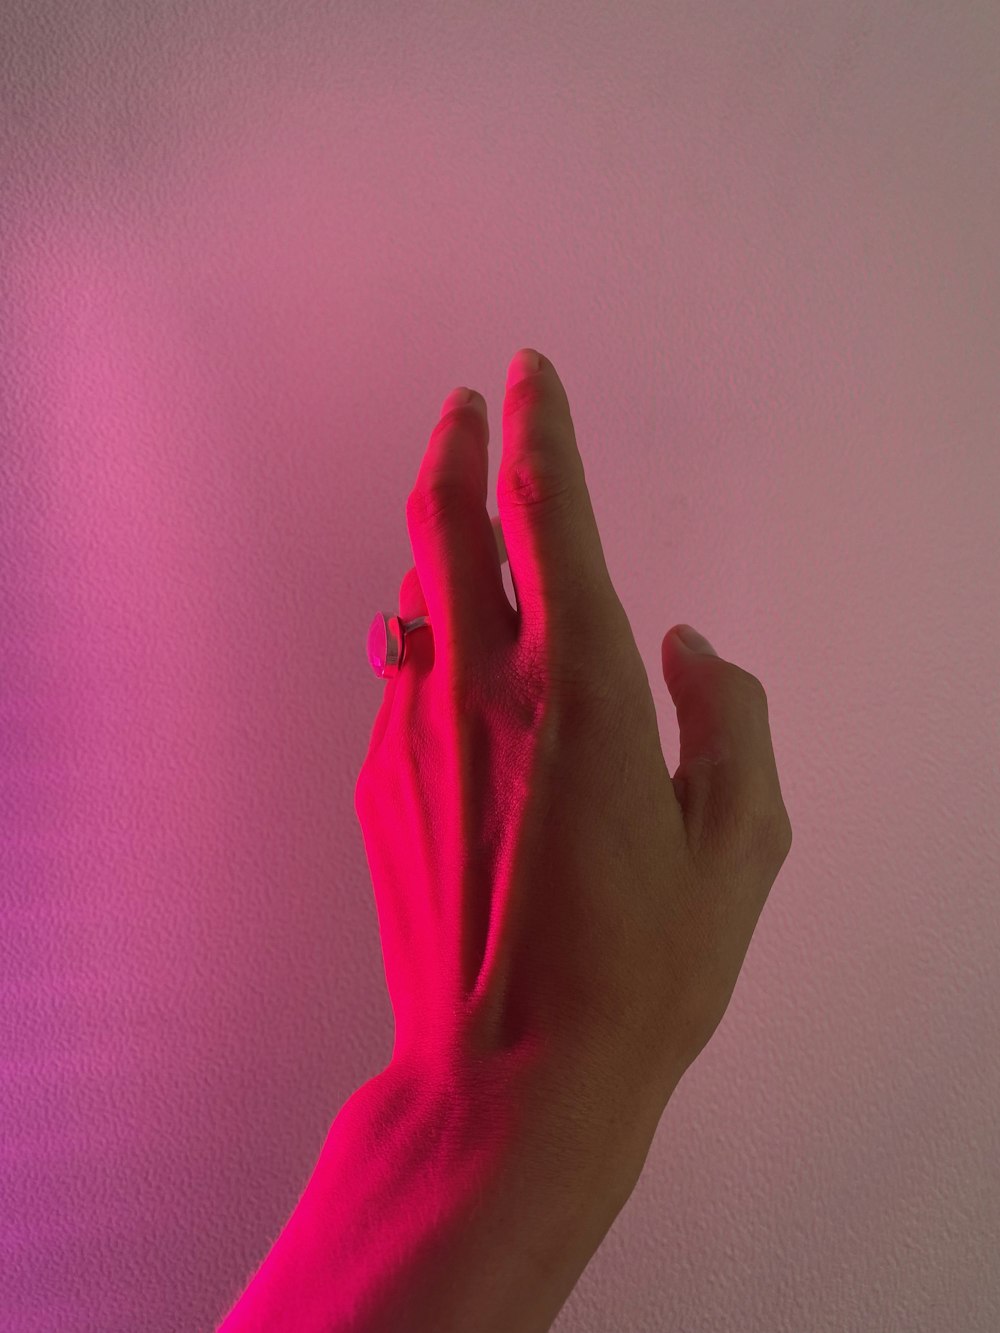 persons hand on pink textile